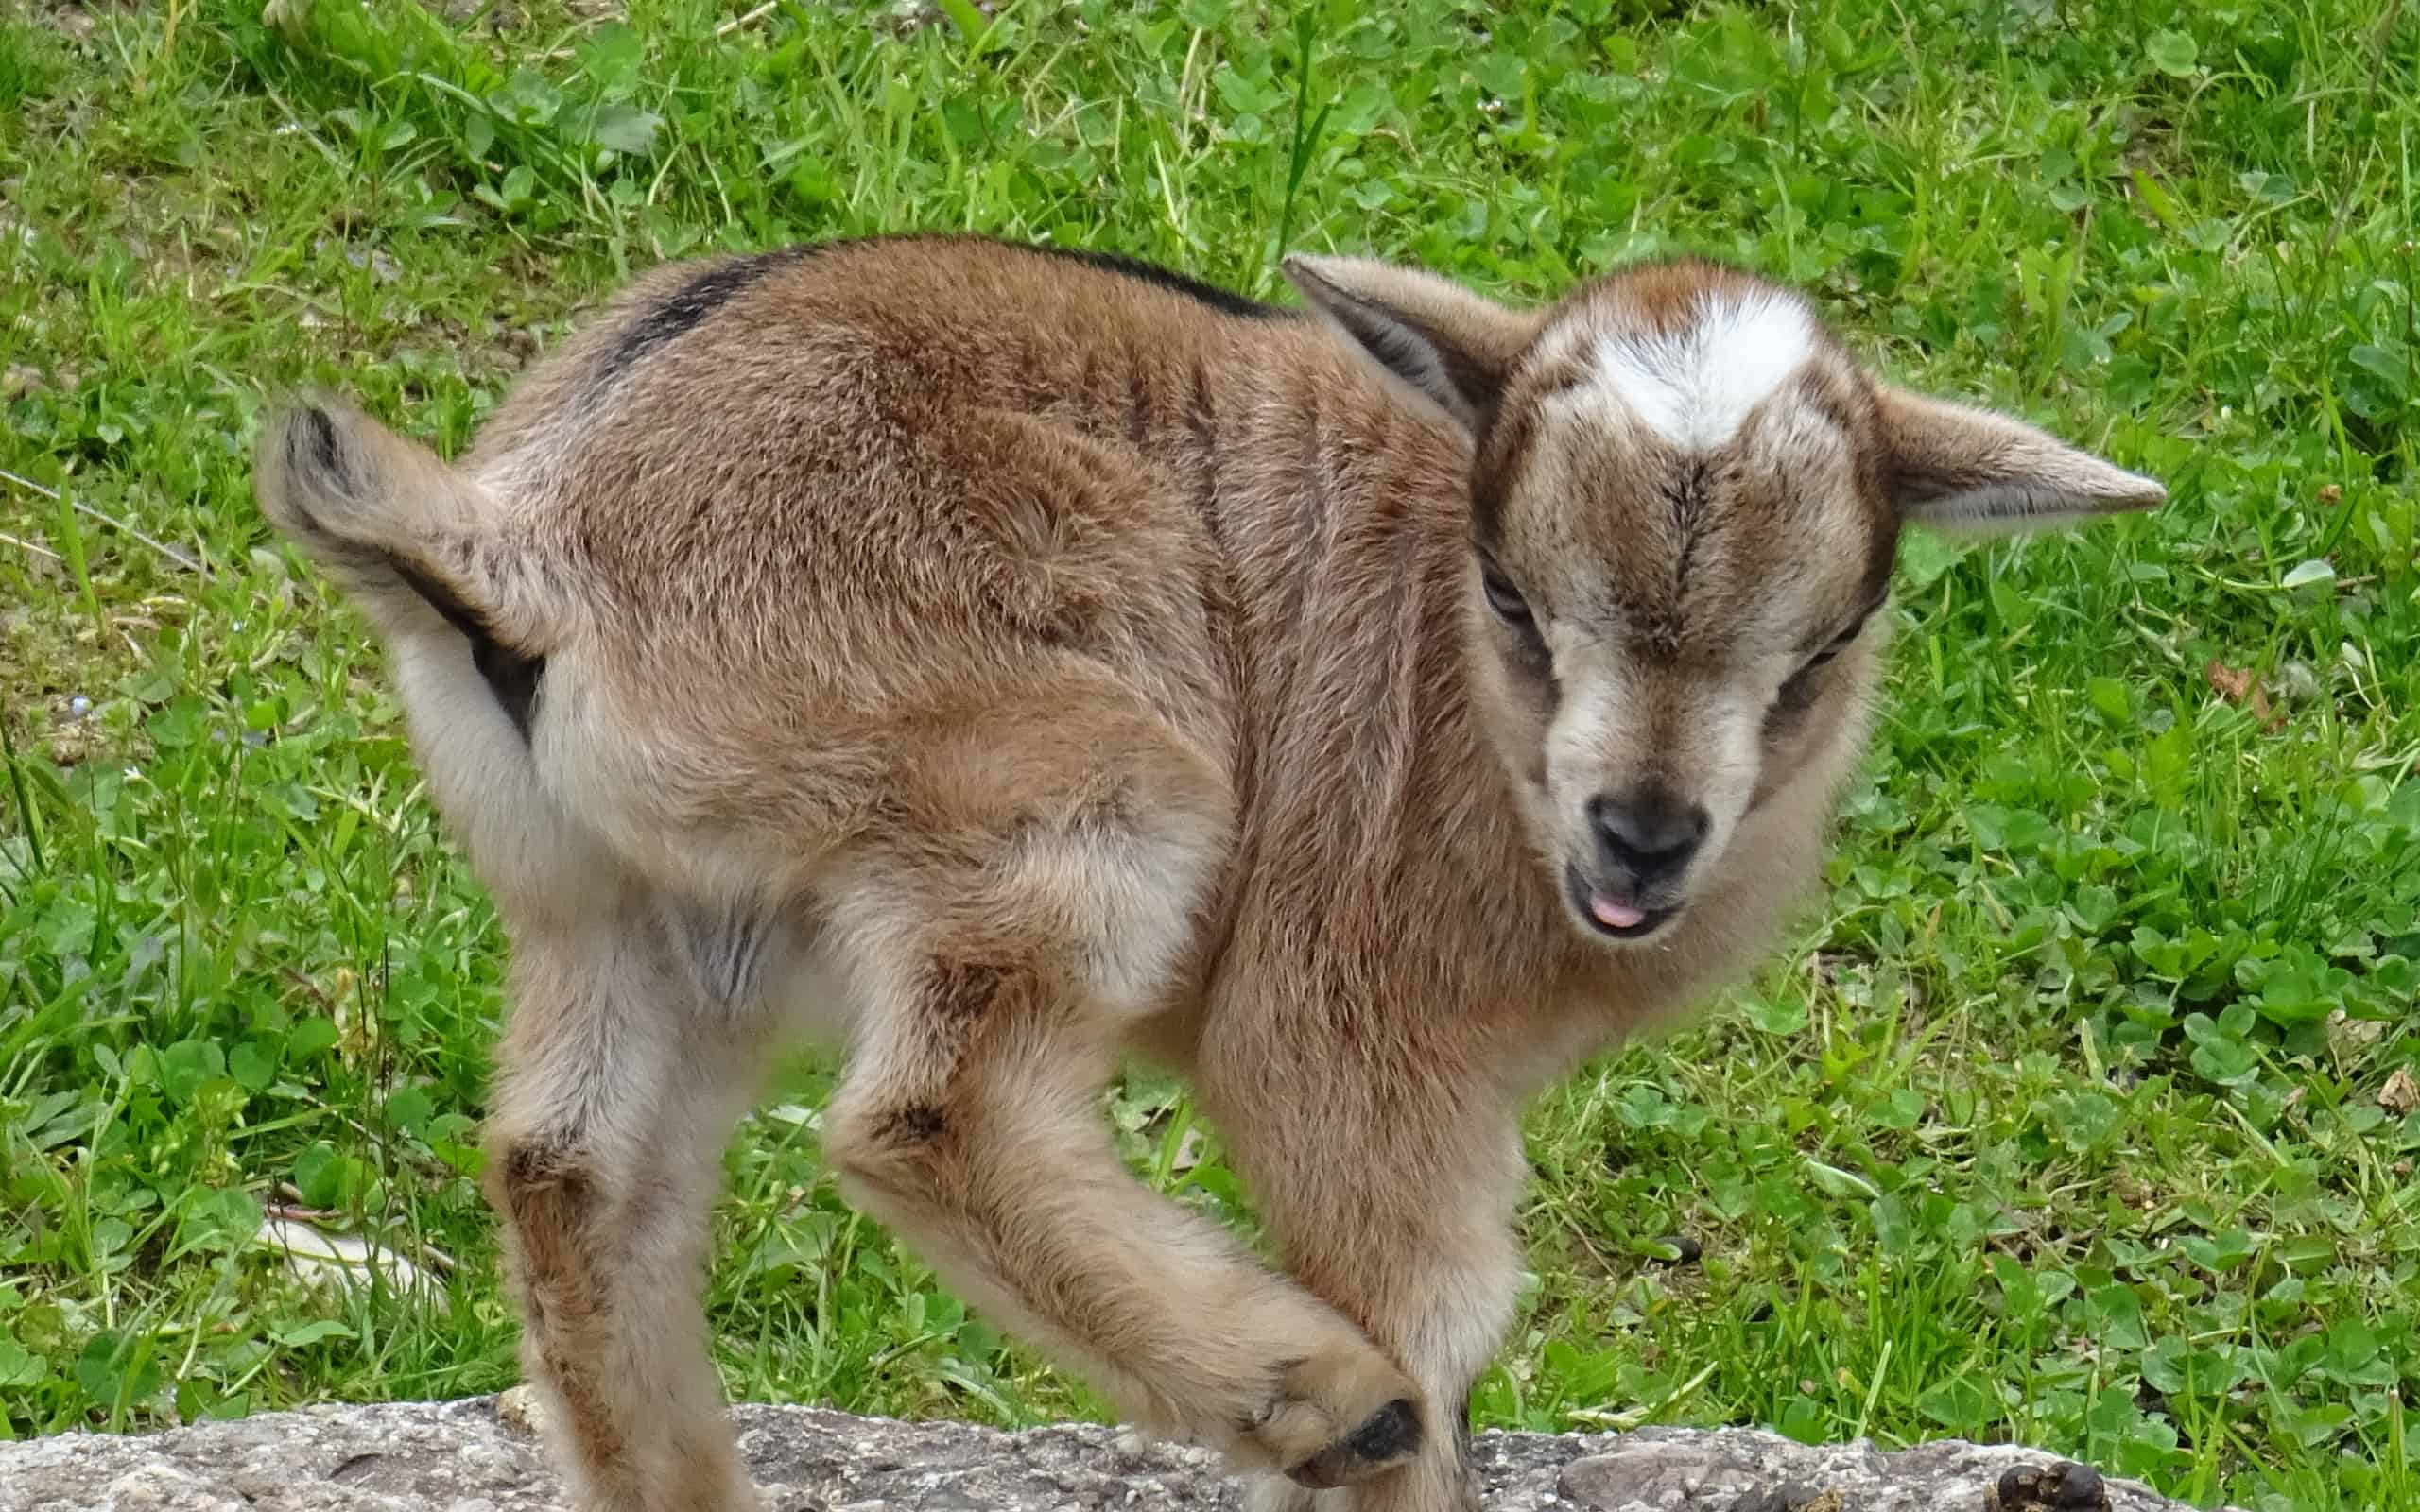 Young pygmy goat